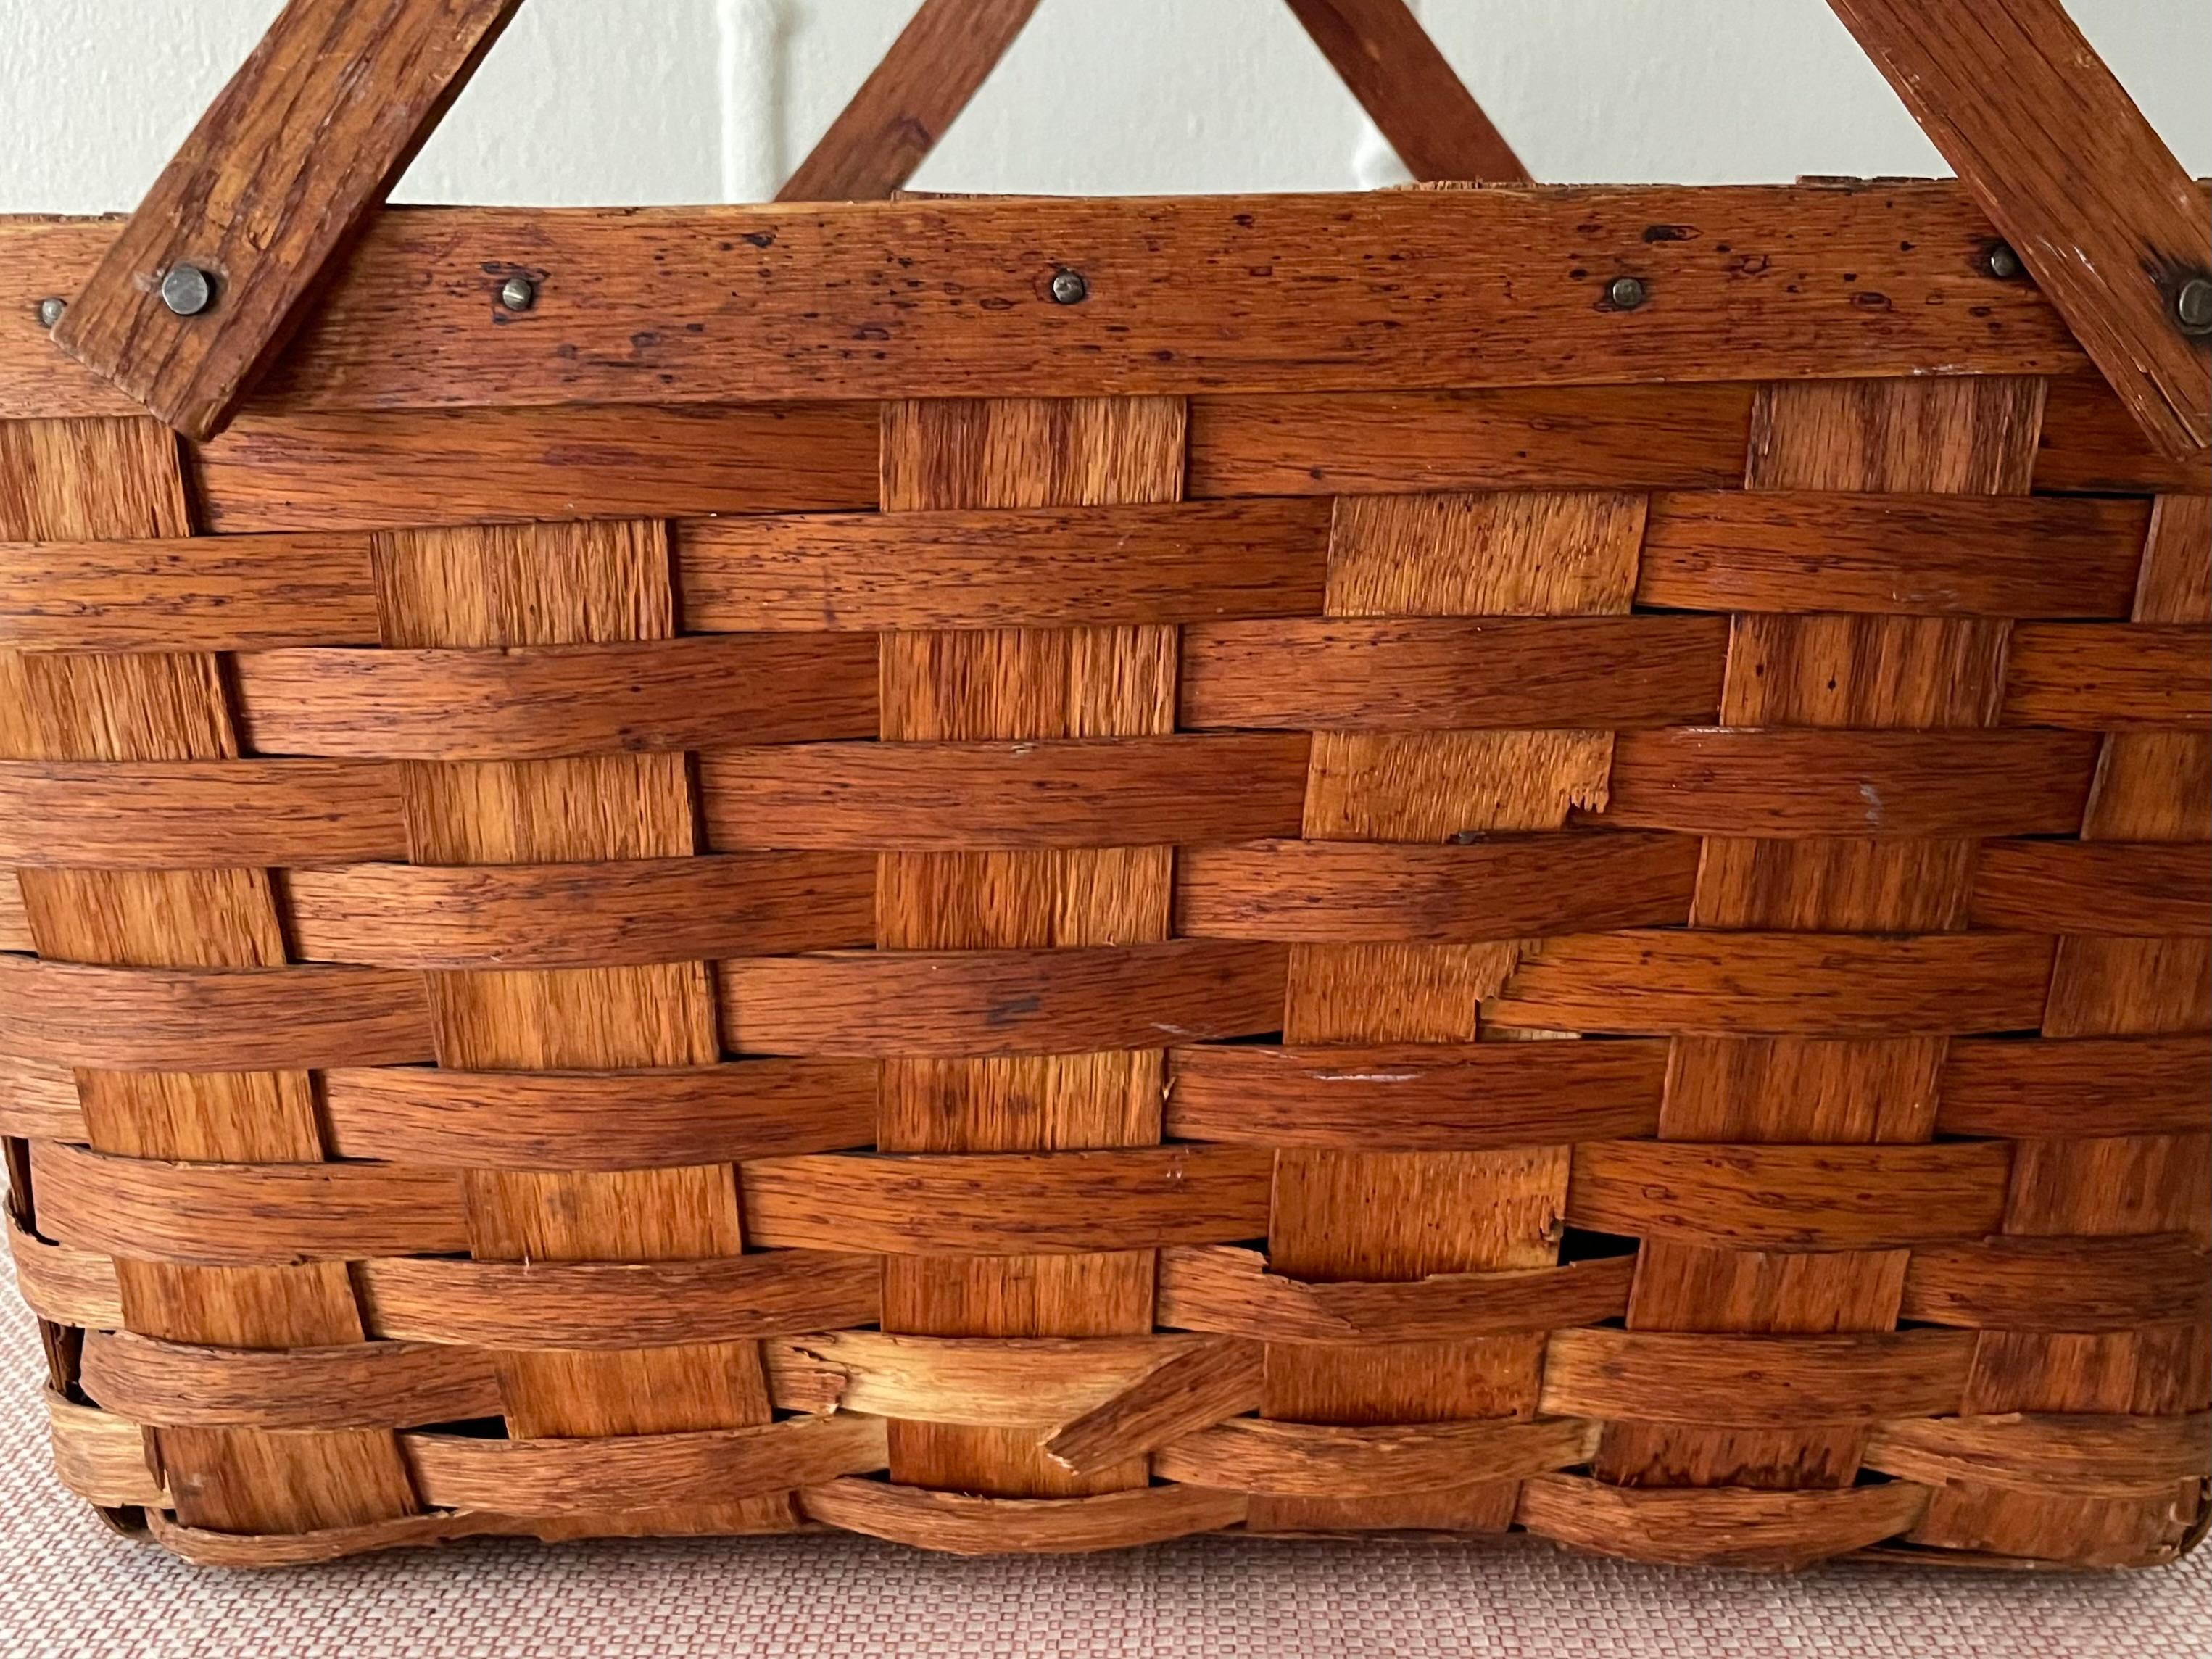 Hand-Woven Woven Hinged Lid Picnic Basket with Handles For Sale